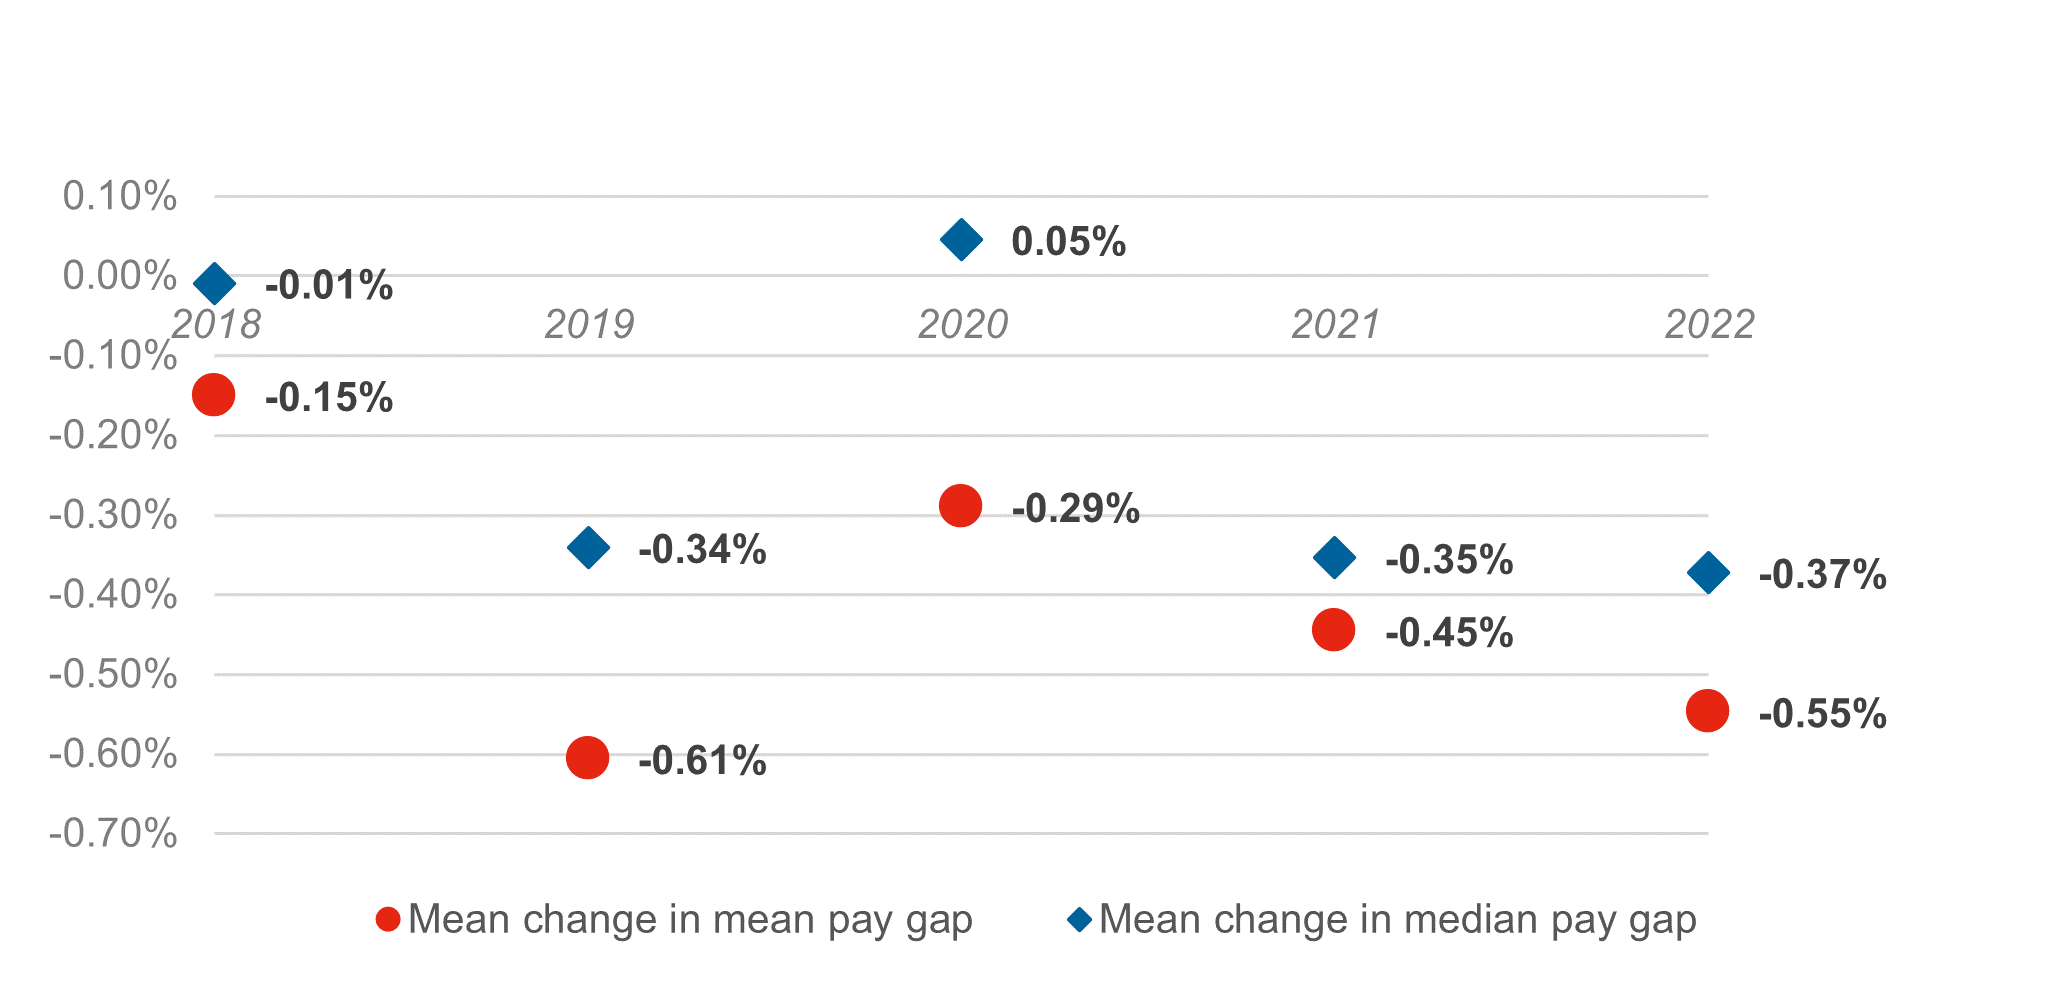 Mean change in mean and median pay gap